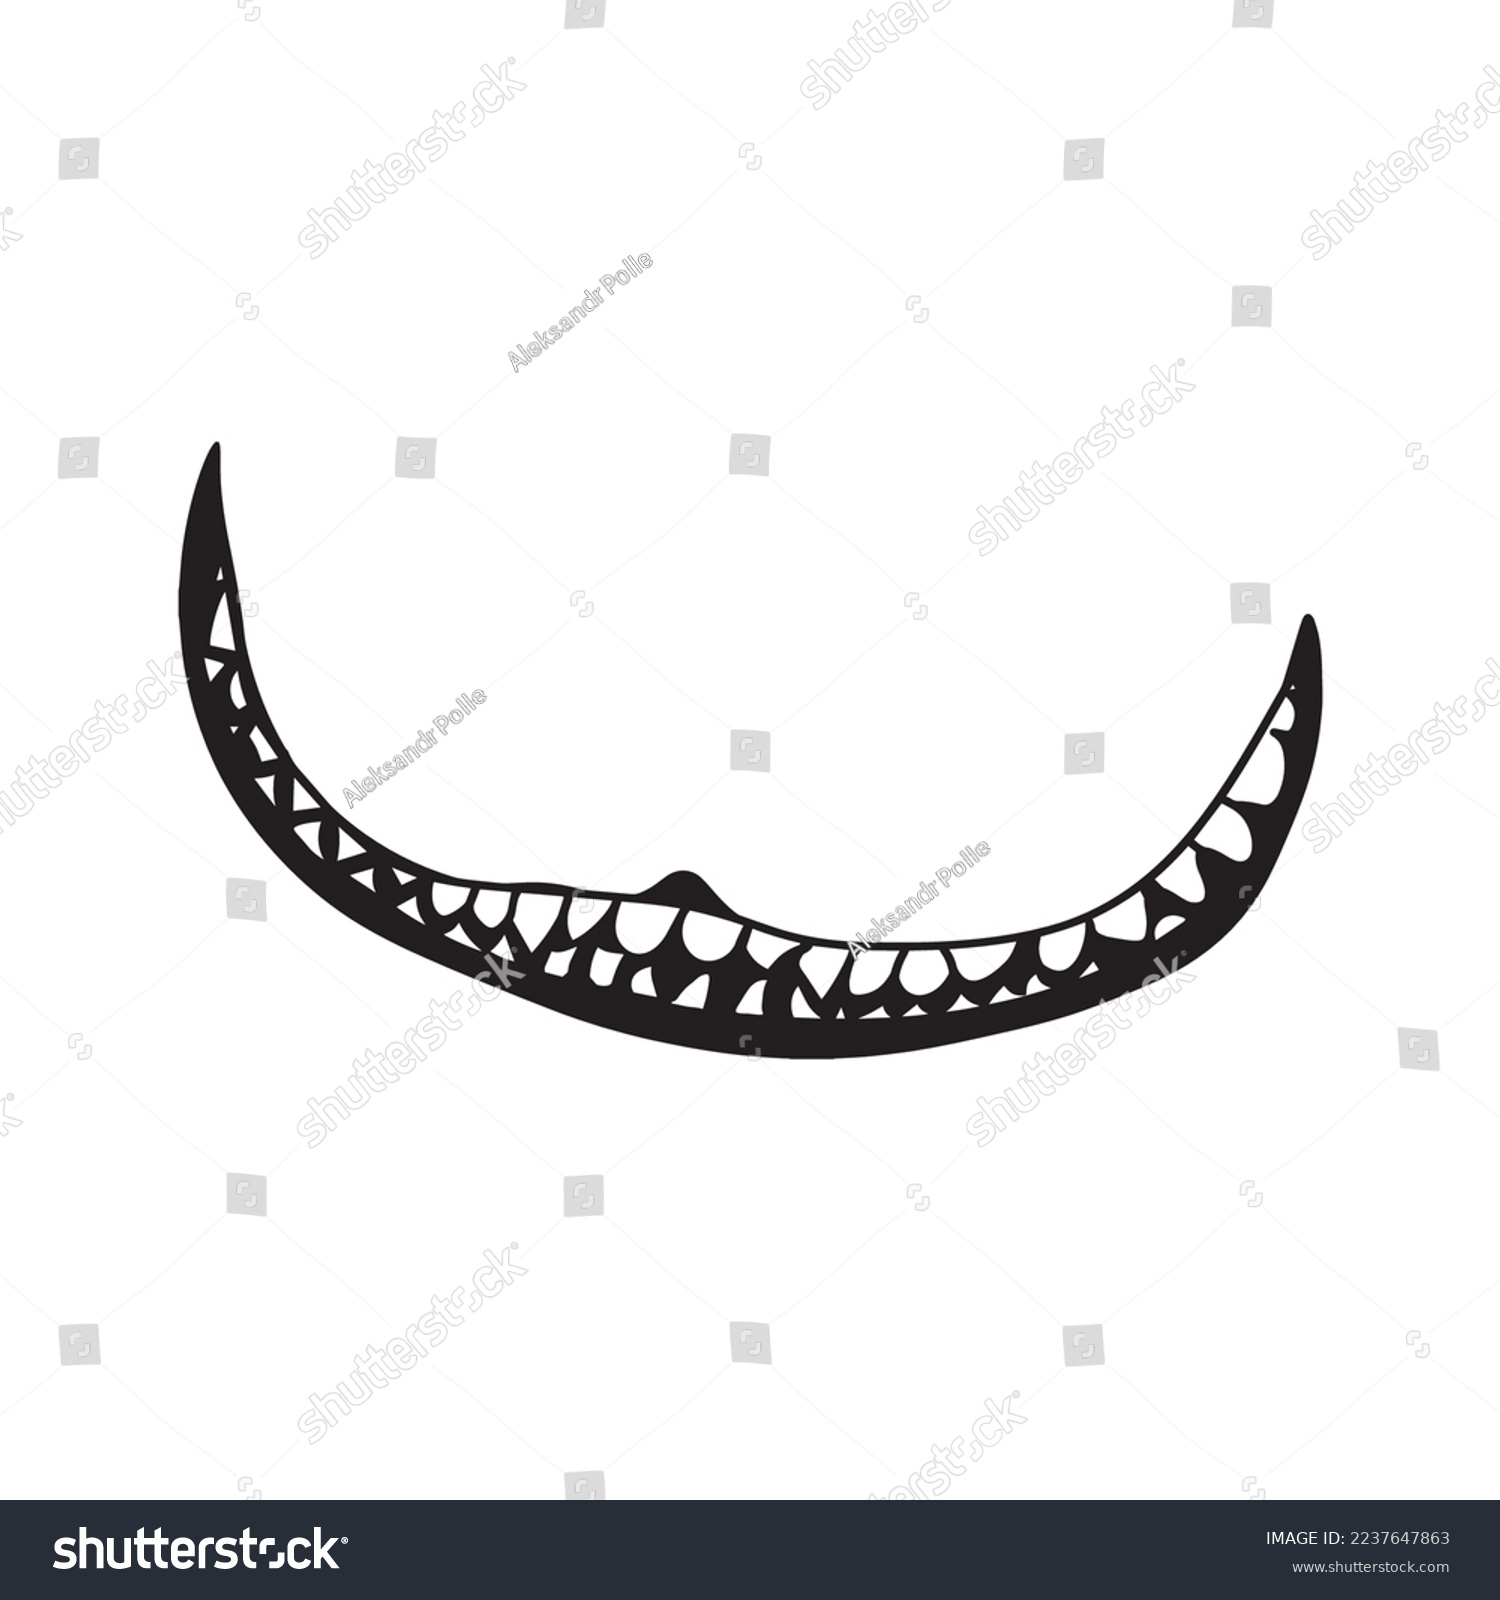 SVG of Cheshire cat smile, grin with teeth black silhouette. Vector drawing on a transparent background. svg